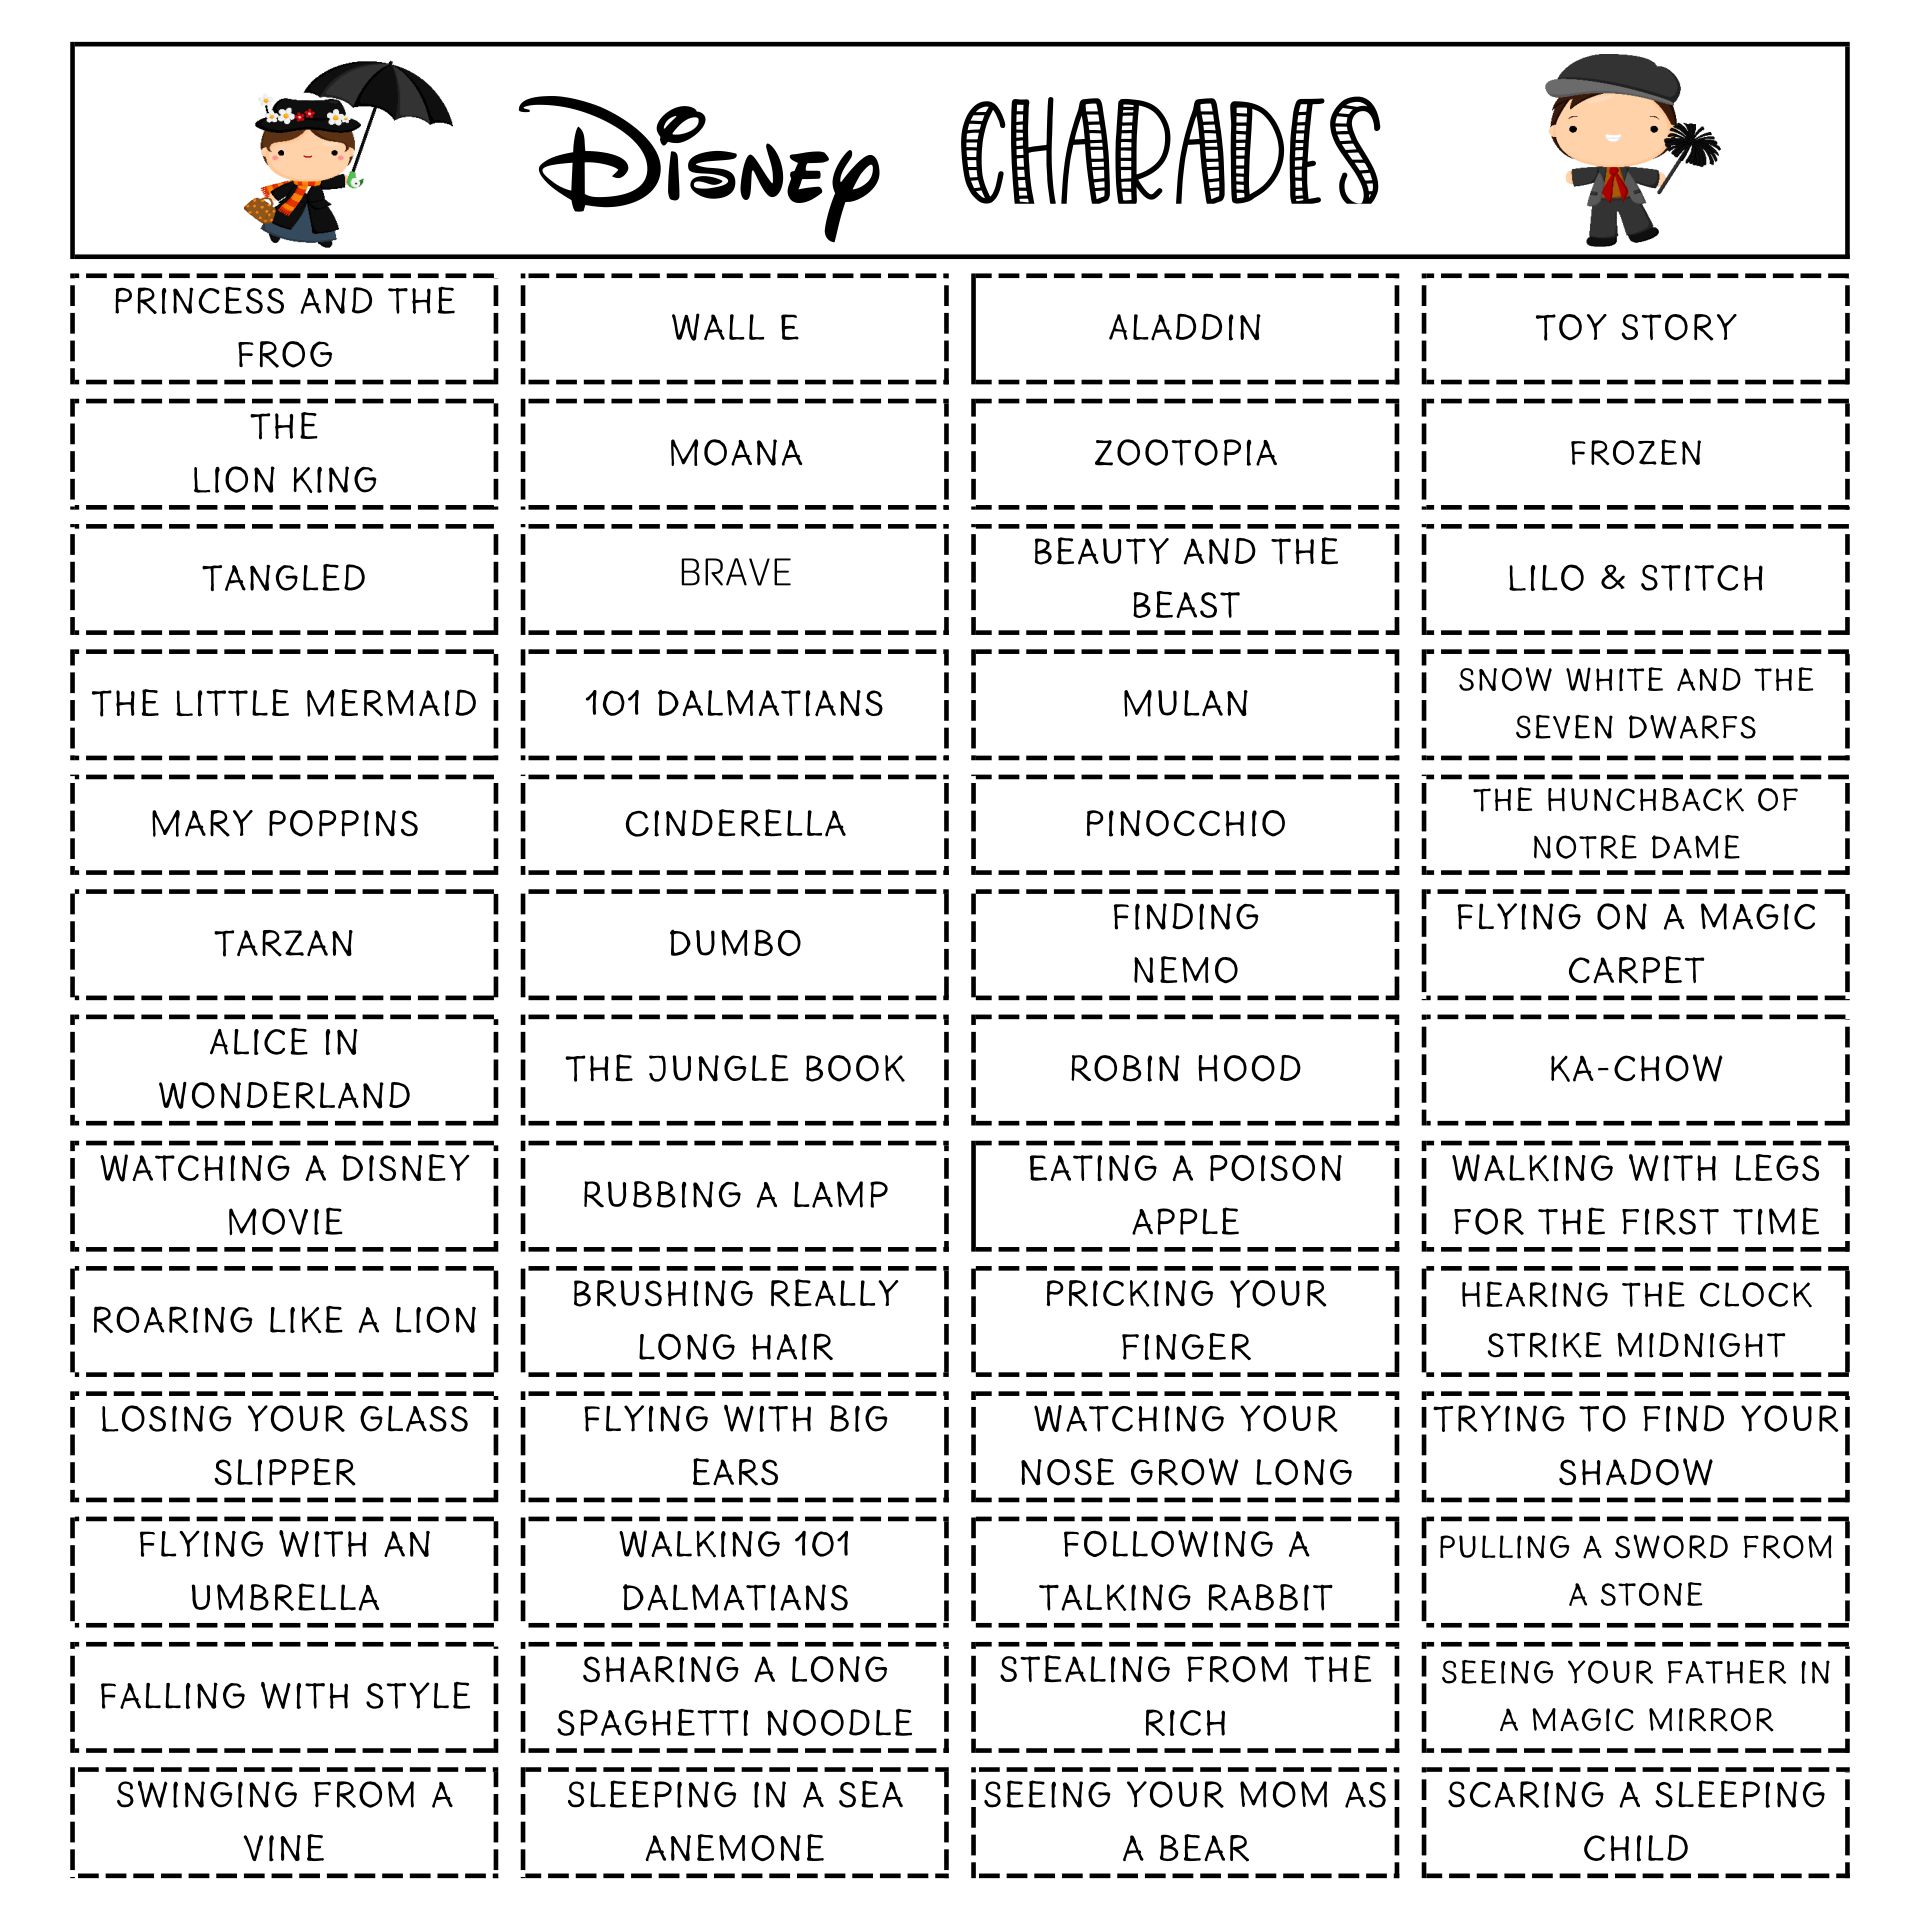 96-printable-charades-cards-for-kids-games-kidsactivities-charades